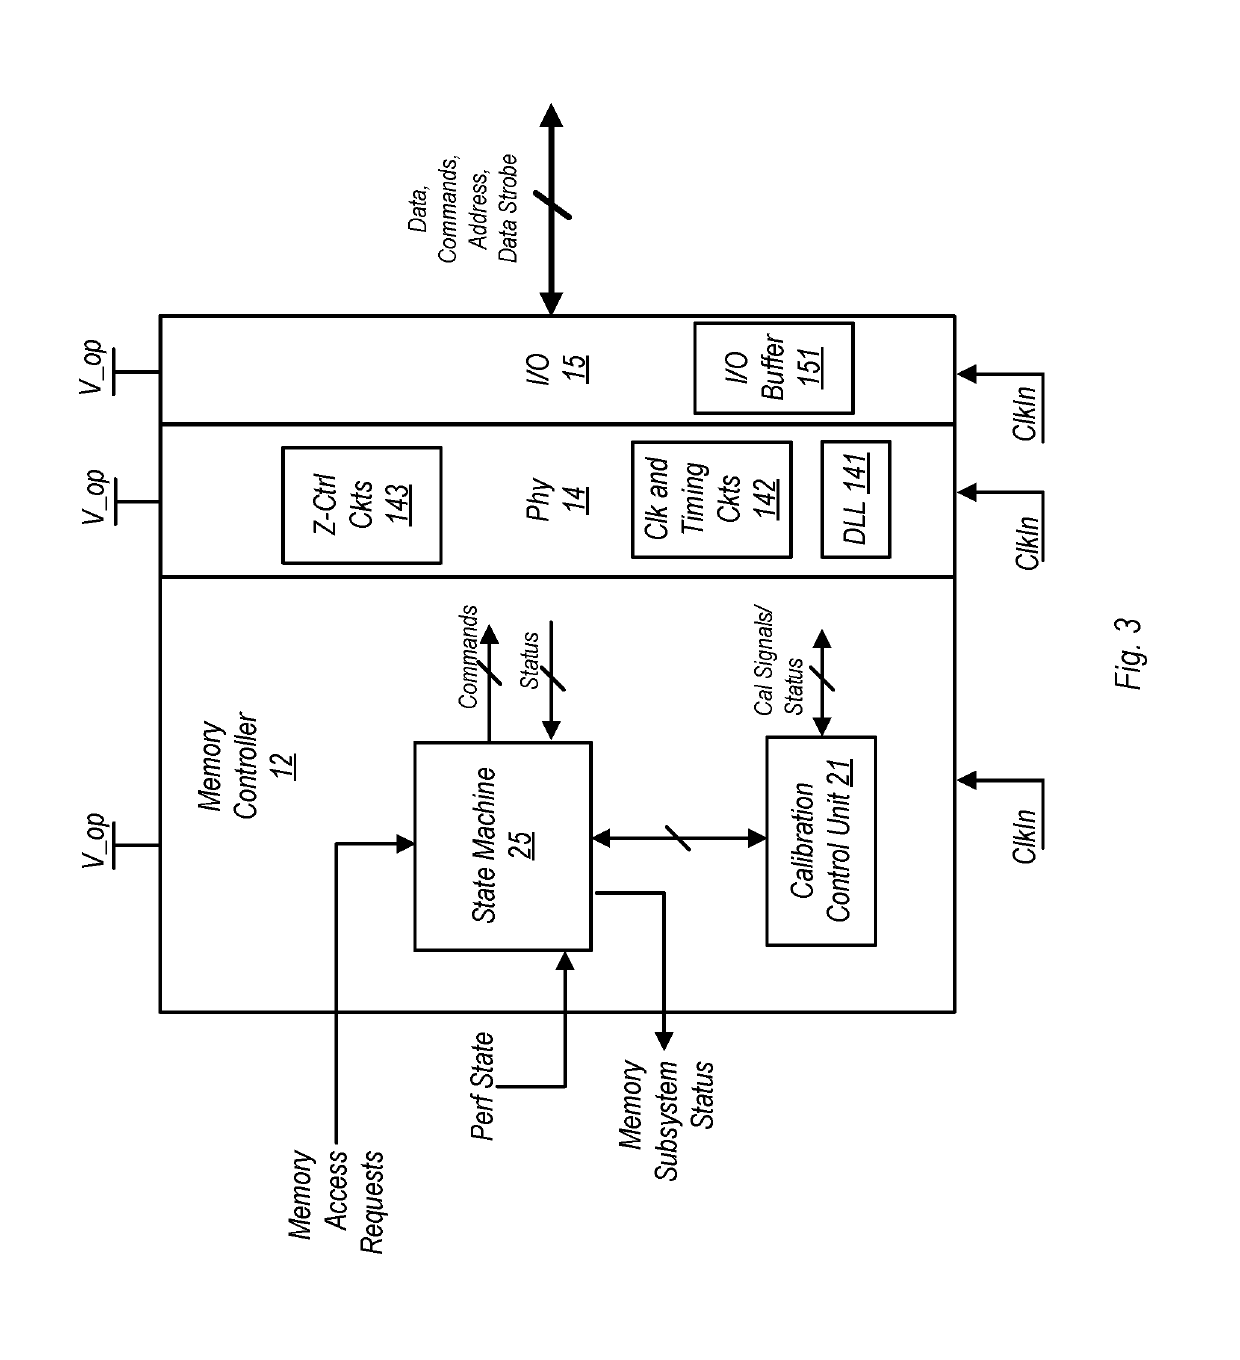 Method and apparatus for interrupting memory bank refresh